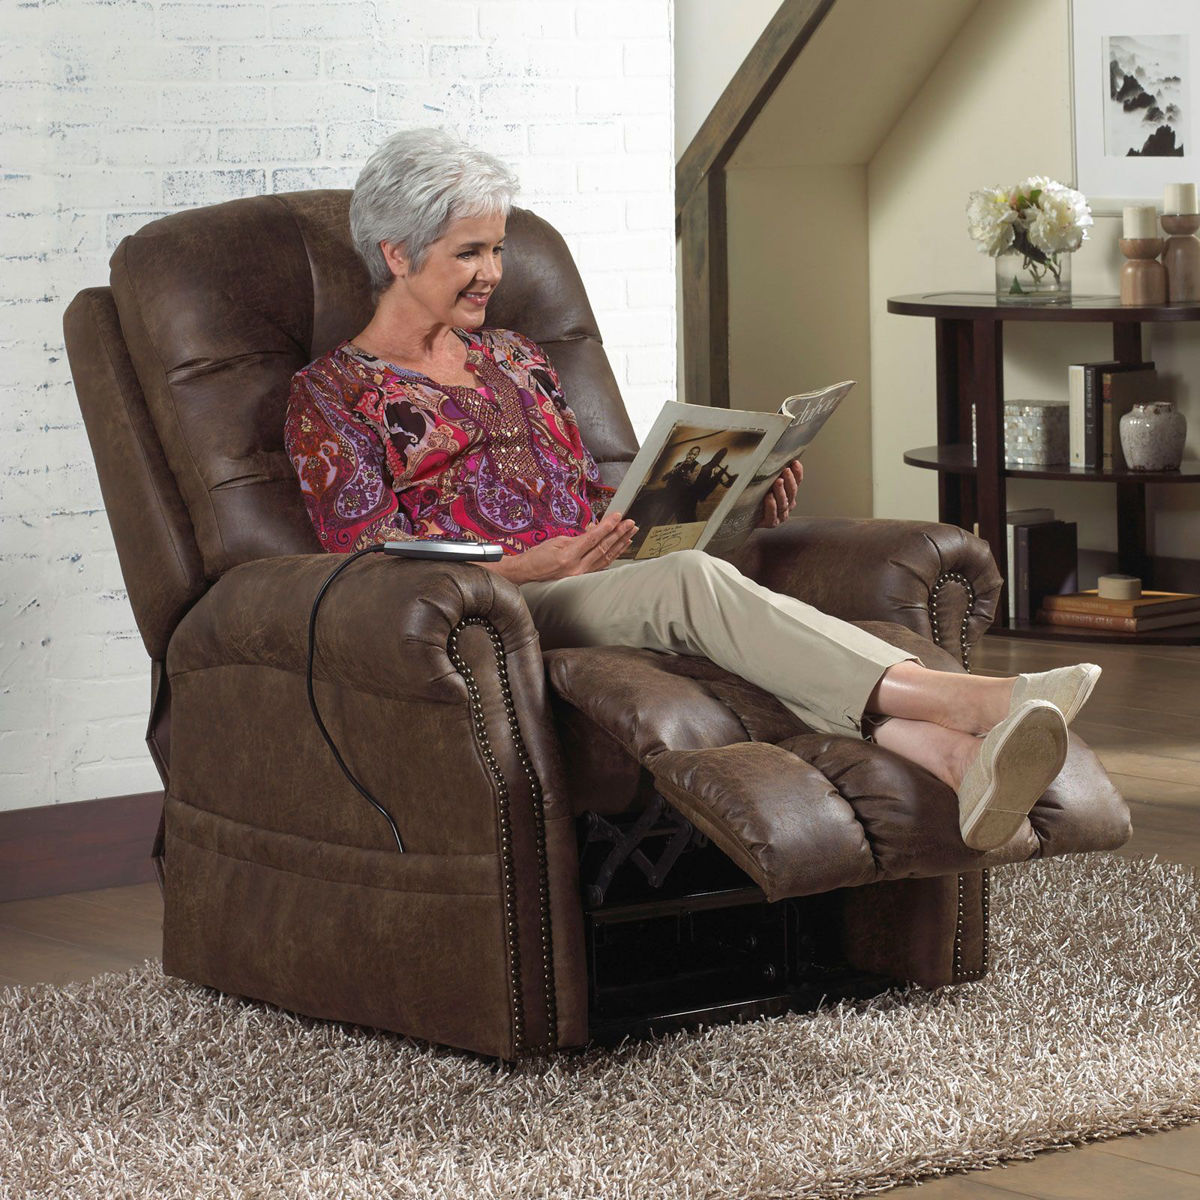 Picture of Ramsey Sable Lift Chair